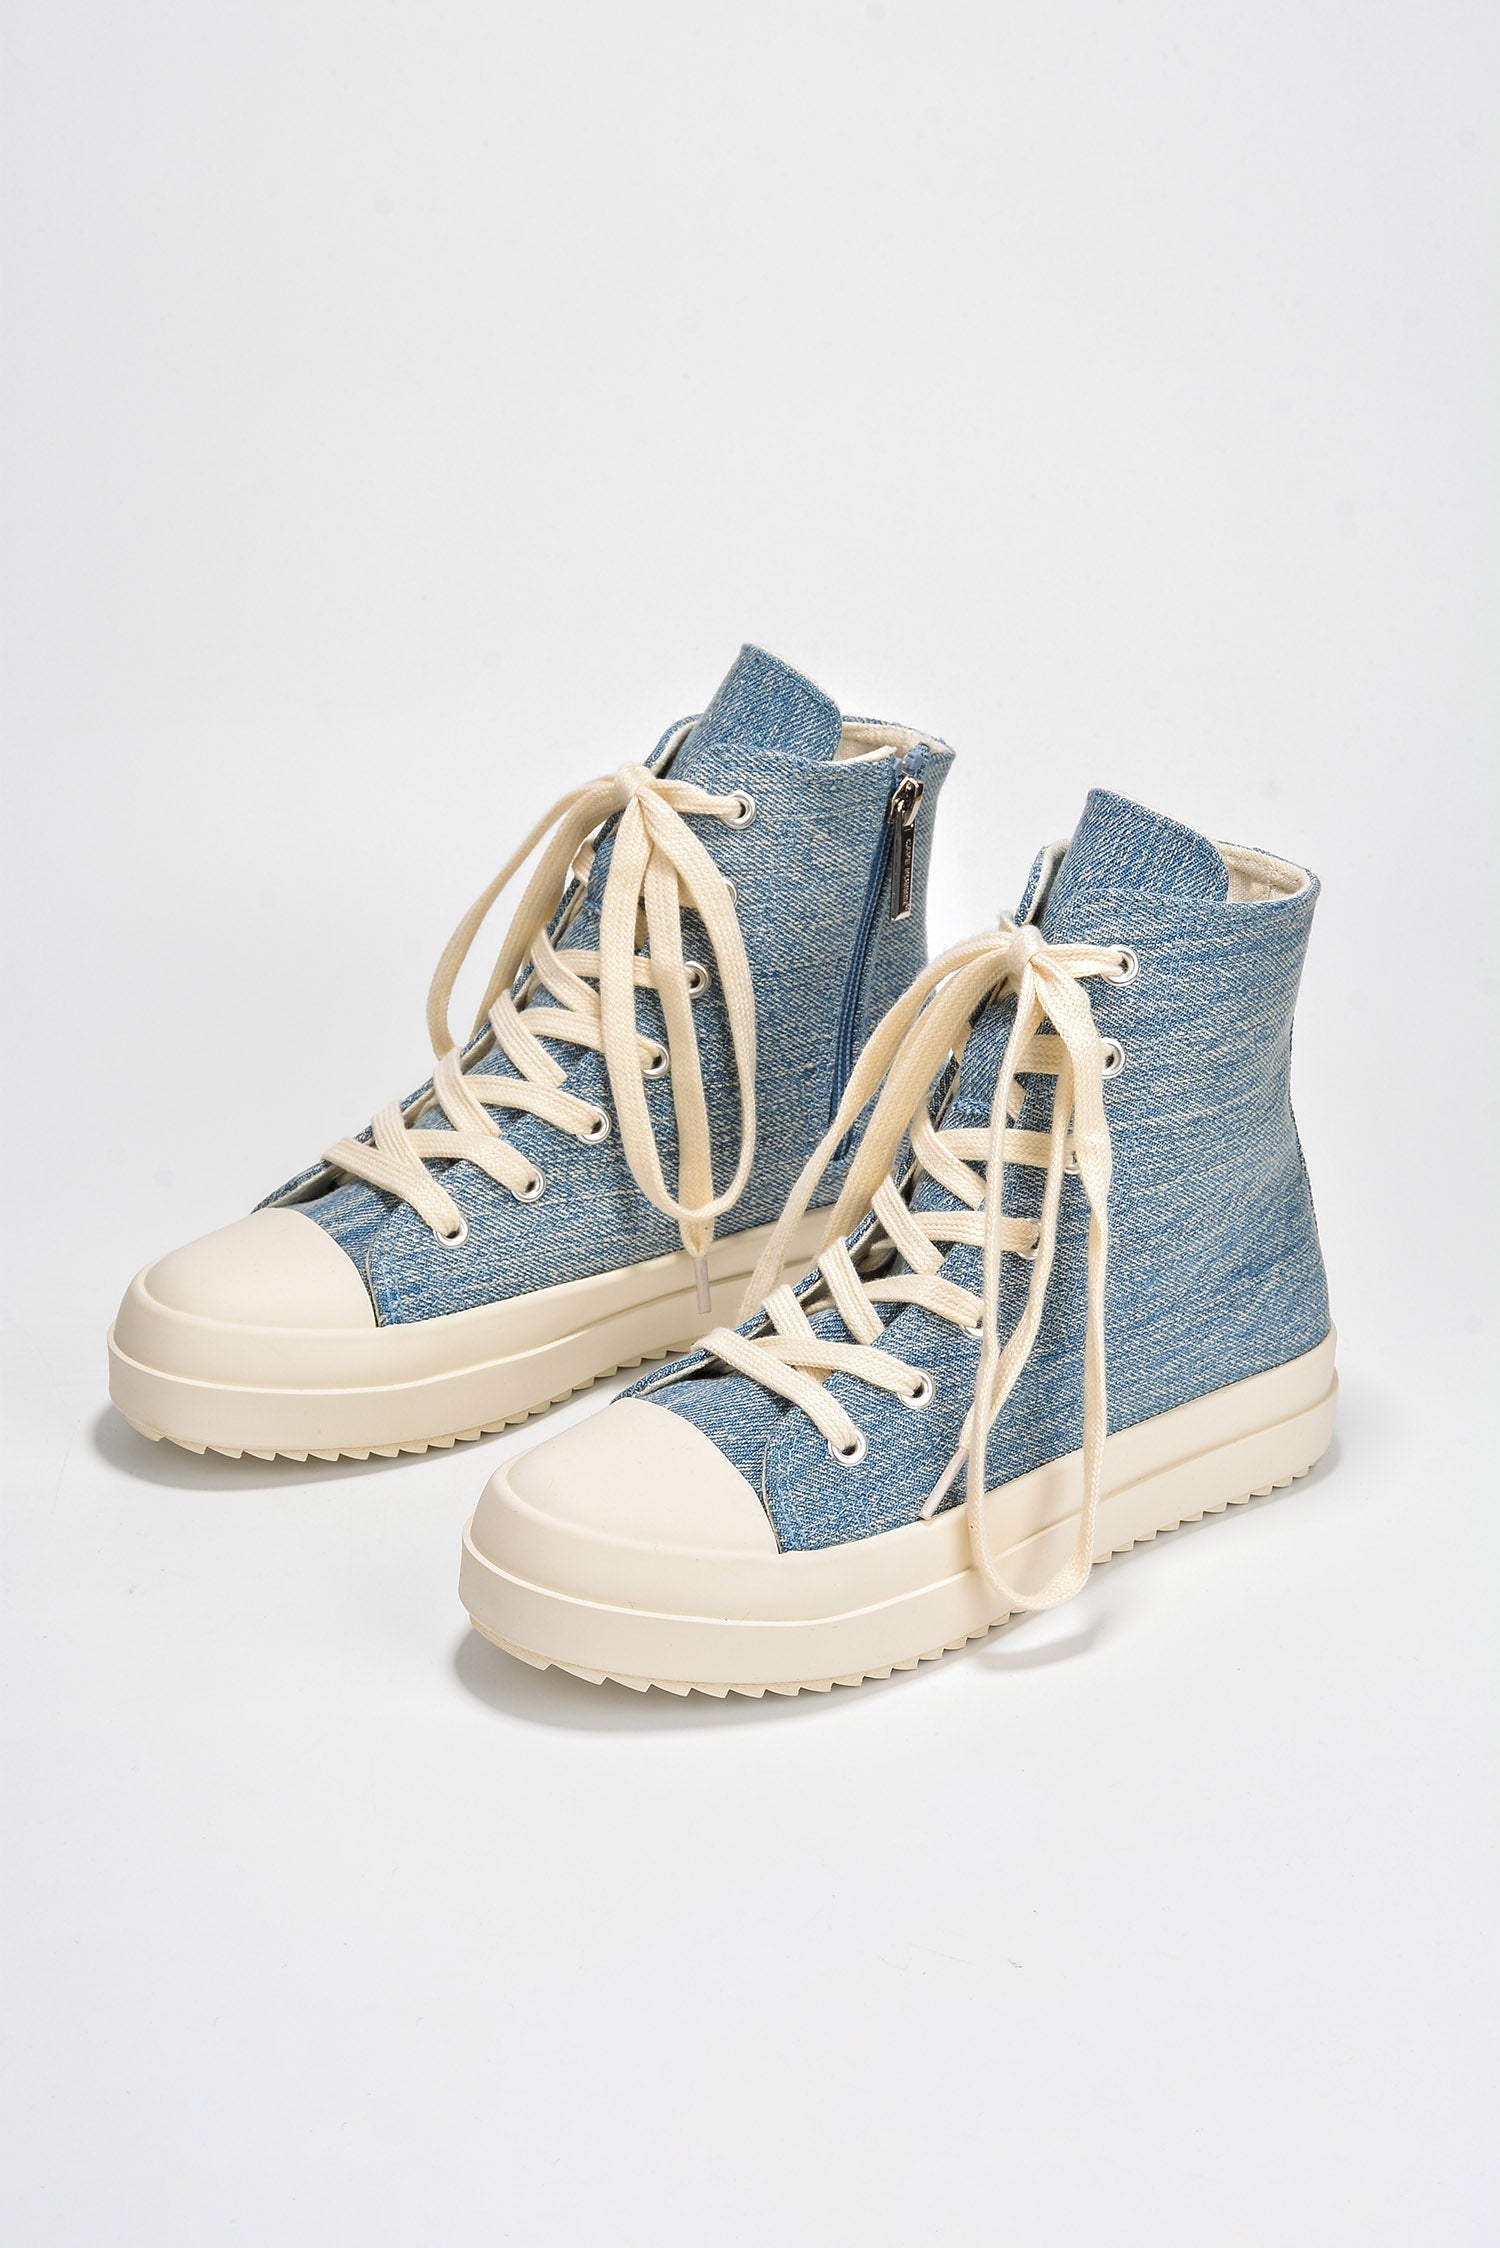 Mania Lace Up High Top Lug Sole Sneakers – Cape Robbin